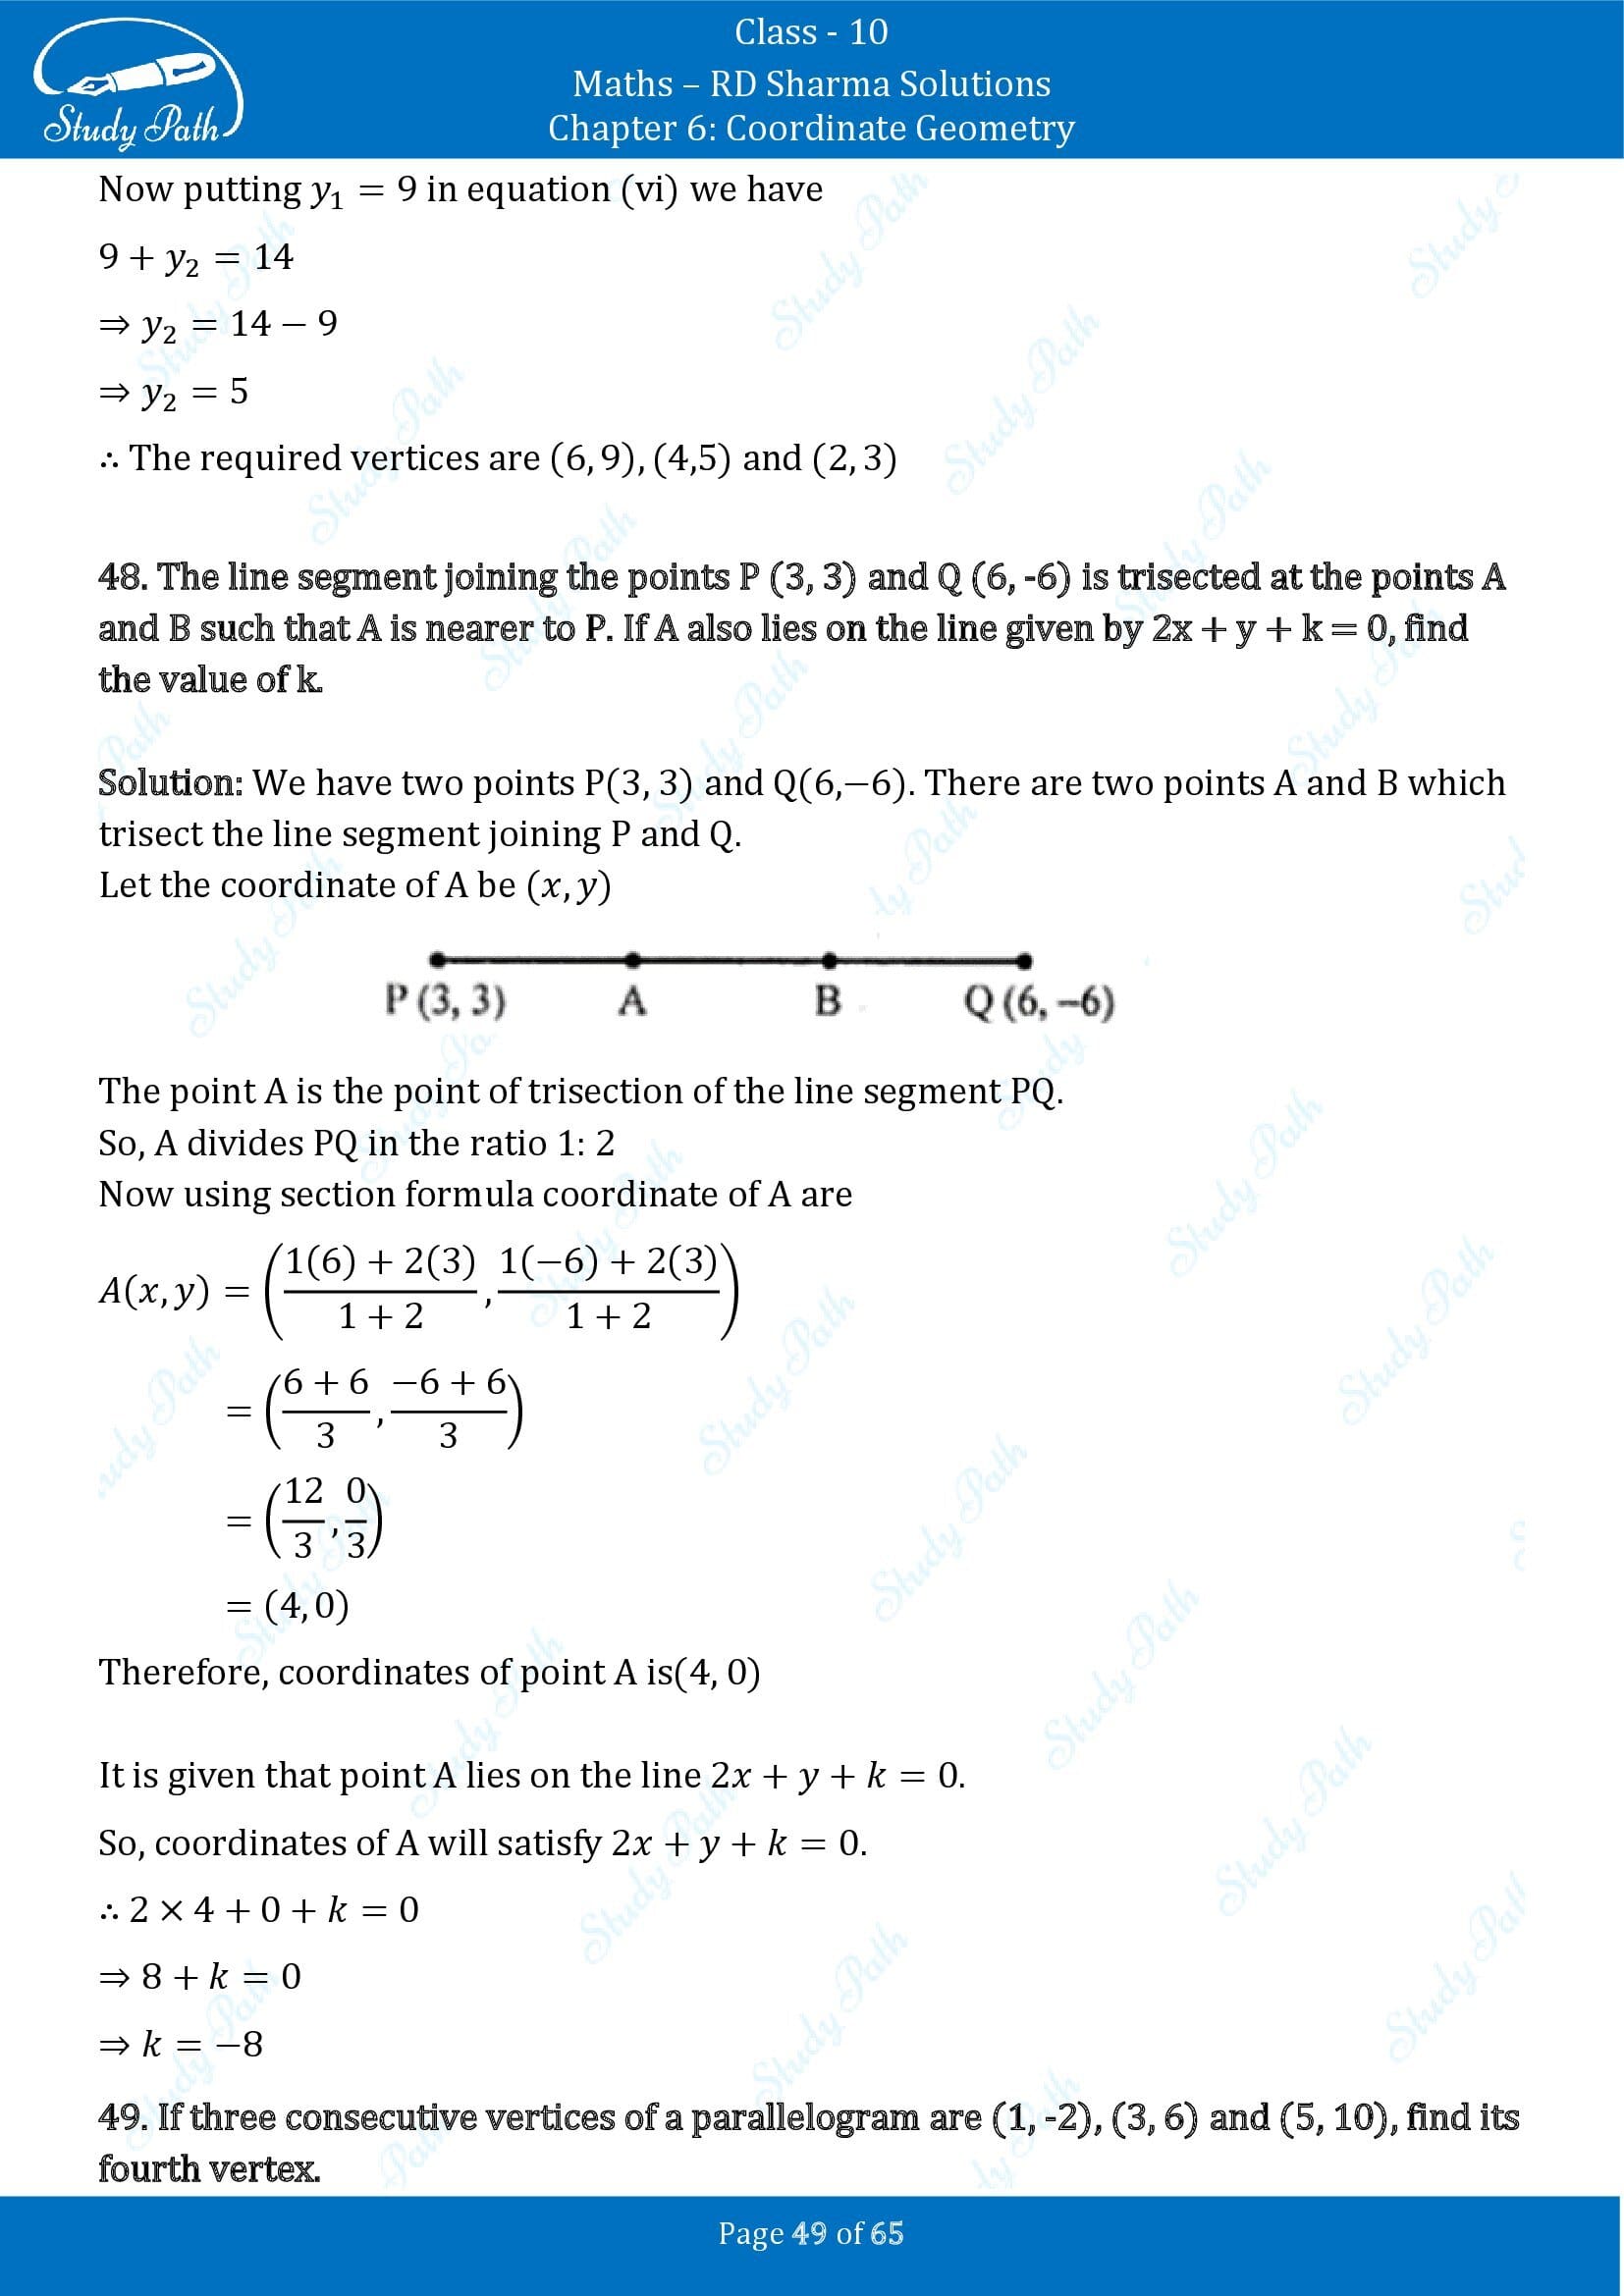 RD Sharma Solutions Class 10 Chapter 6 Coordinate Geometry Exercise 6.3 00049